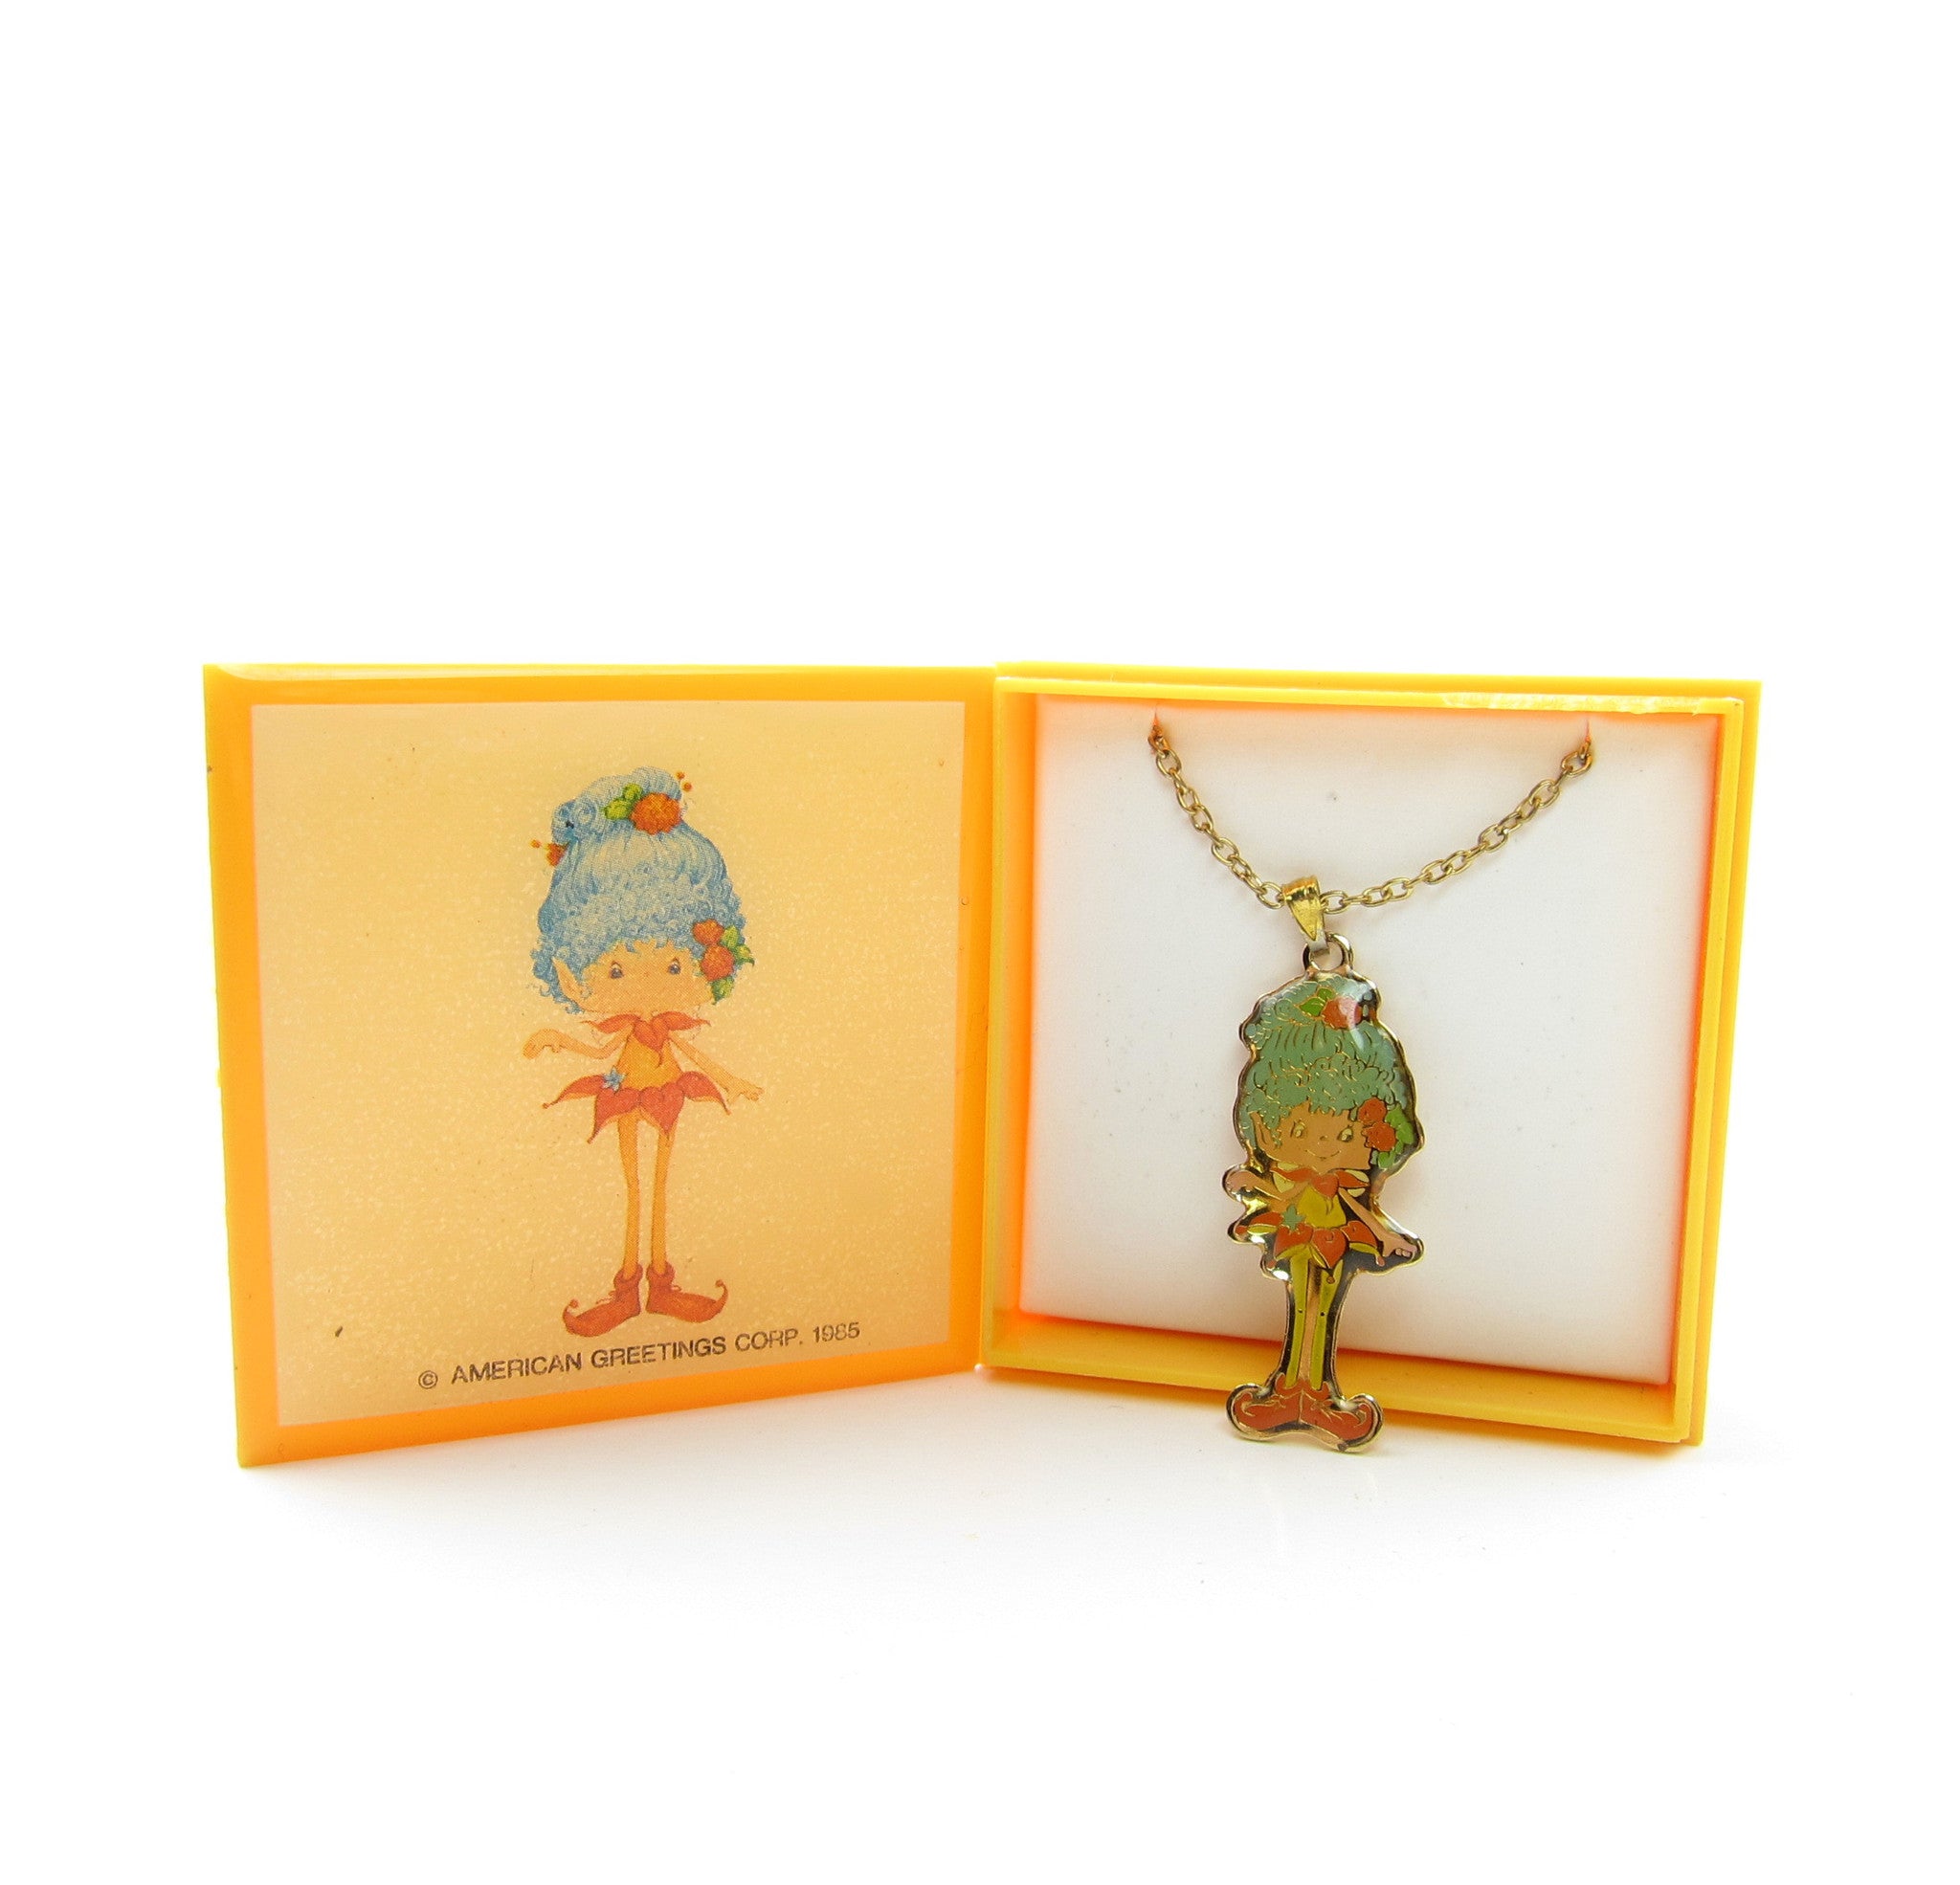 Willow Song Herself the Elf necklace in gift box